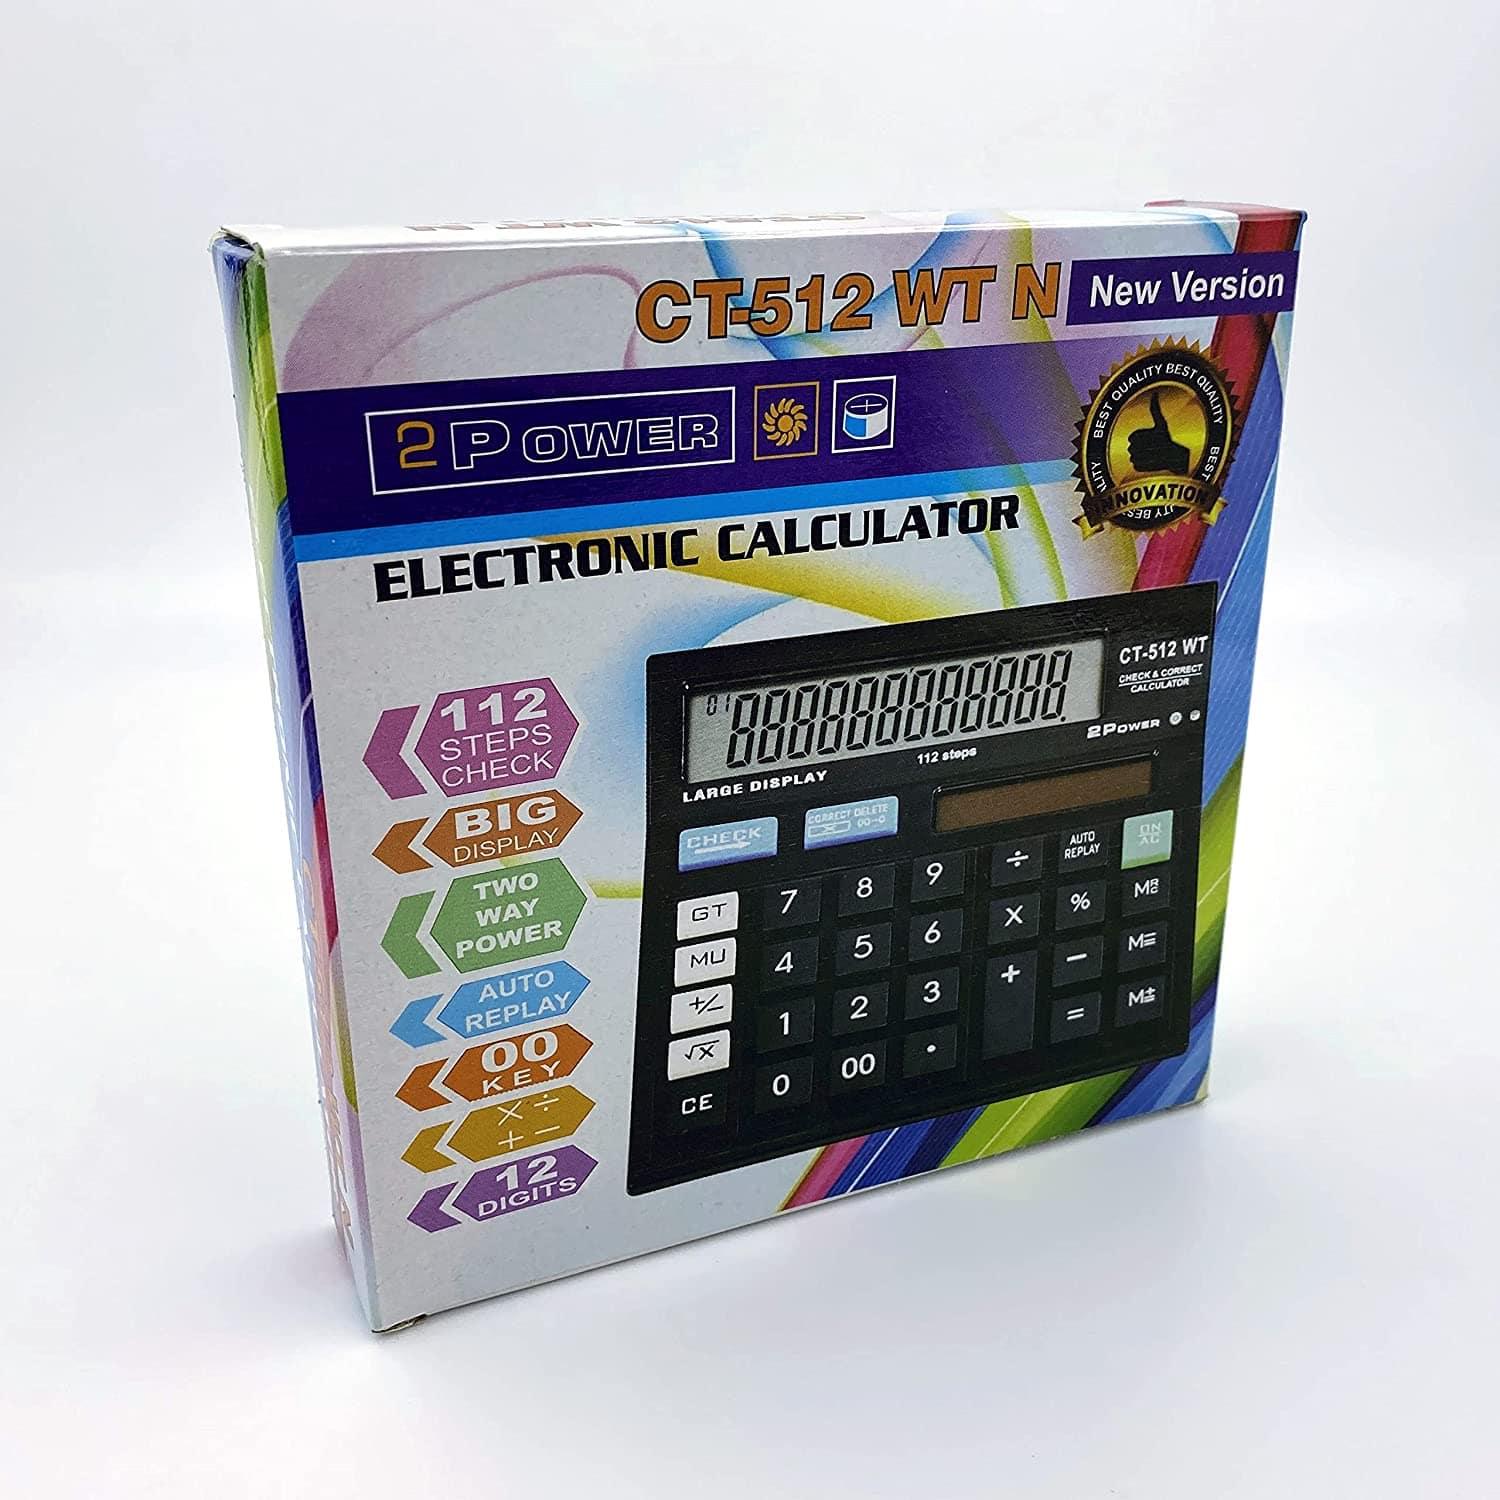 Generic CT 512 WT N Basic Calculator New Version with Big Display 112 Steps Check Two Way Power-Calculators-dealsplant